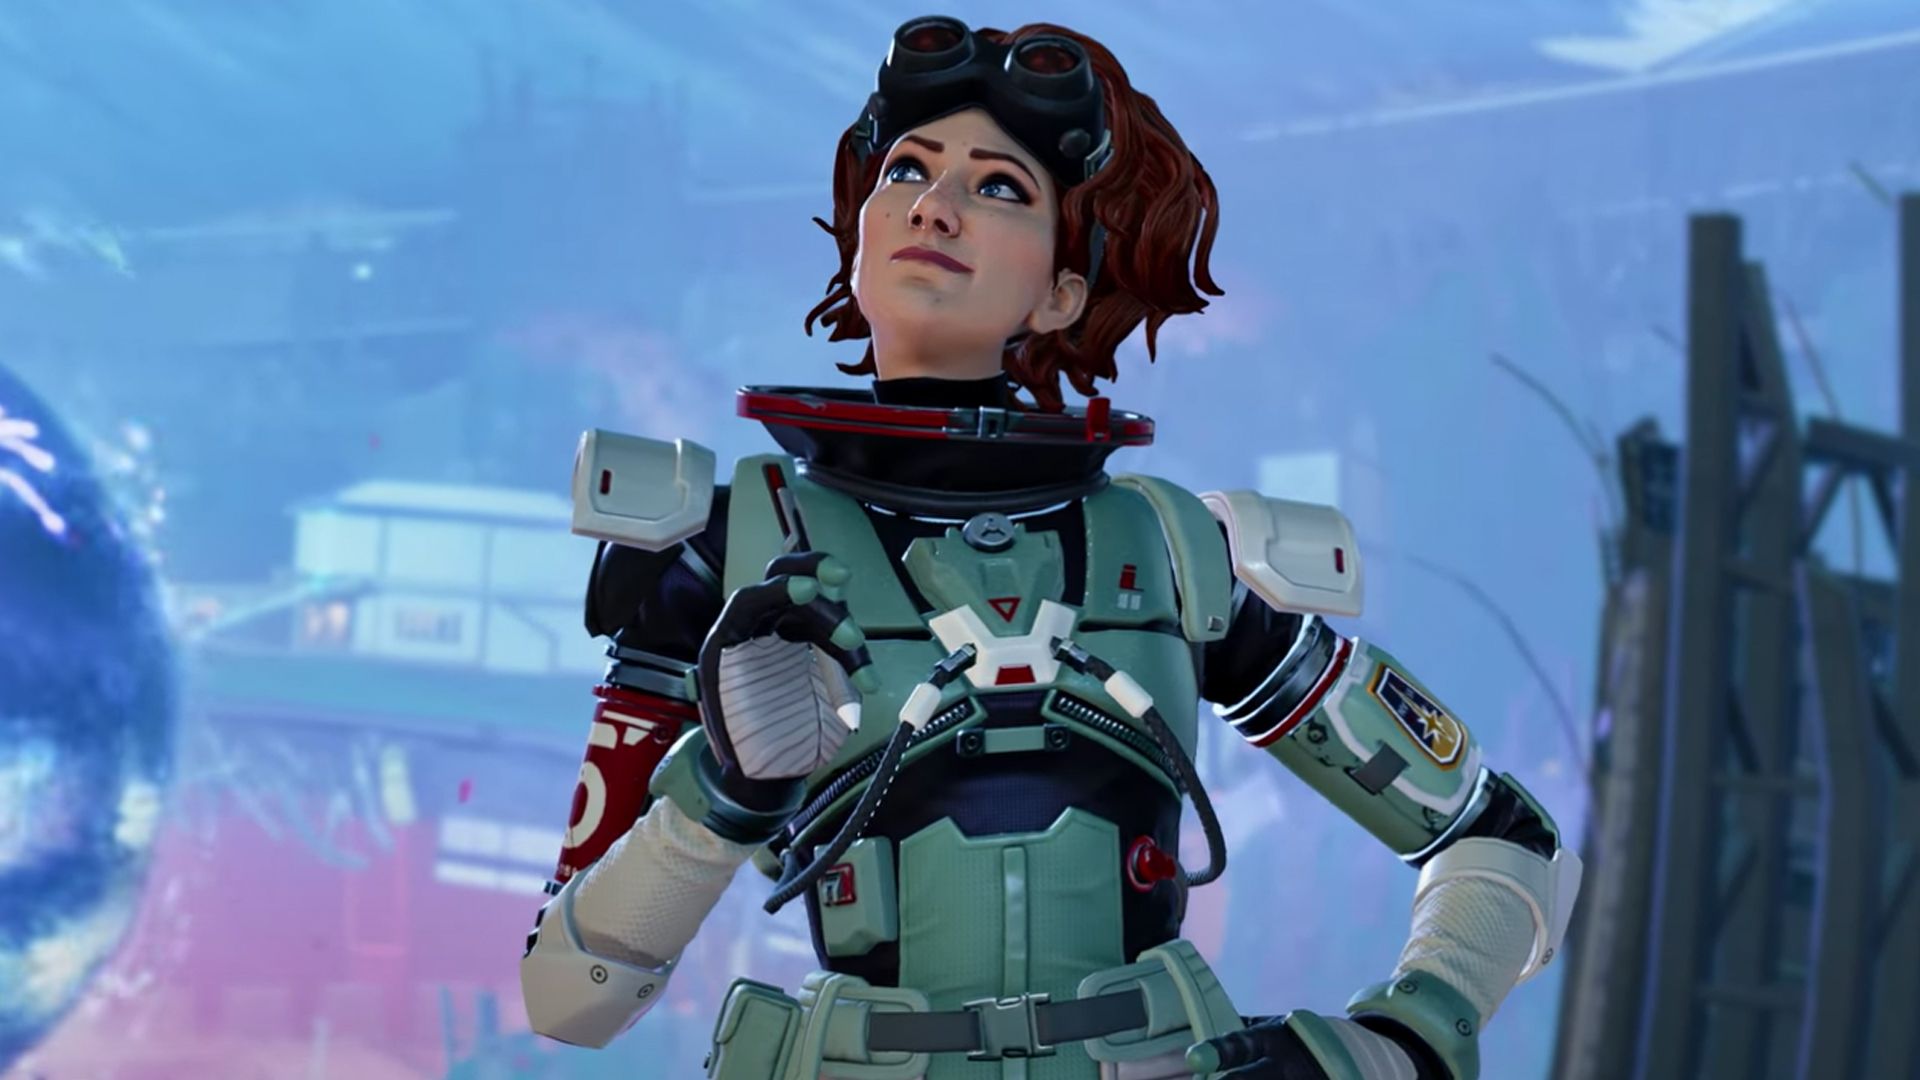 Apex Legends' new character Horizon is the perfect addition to an aggressive squad